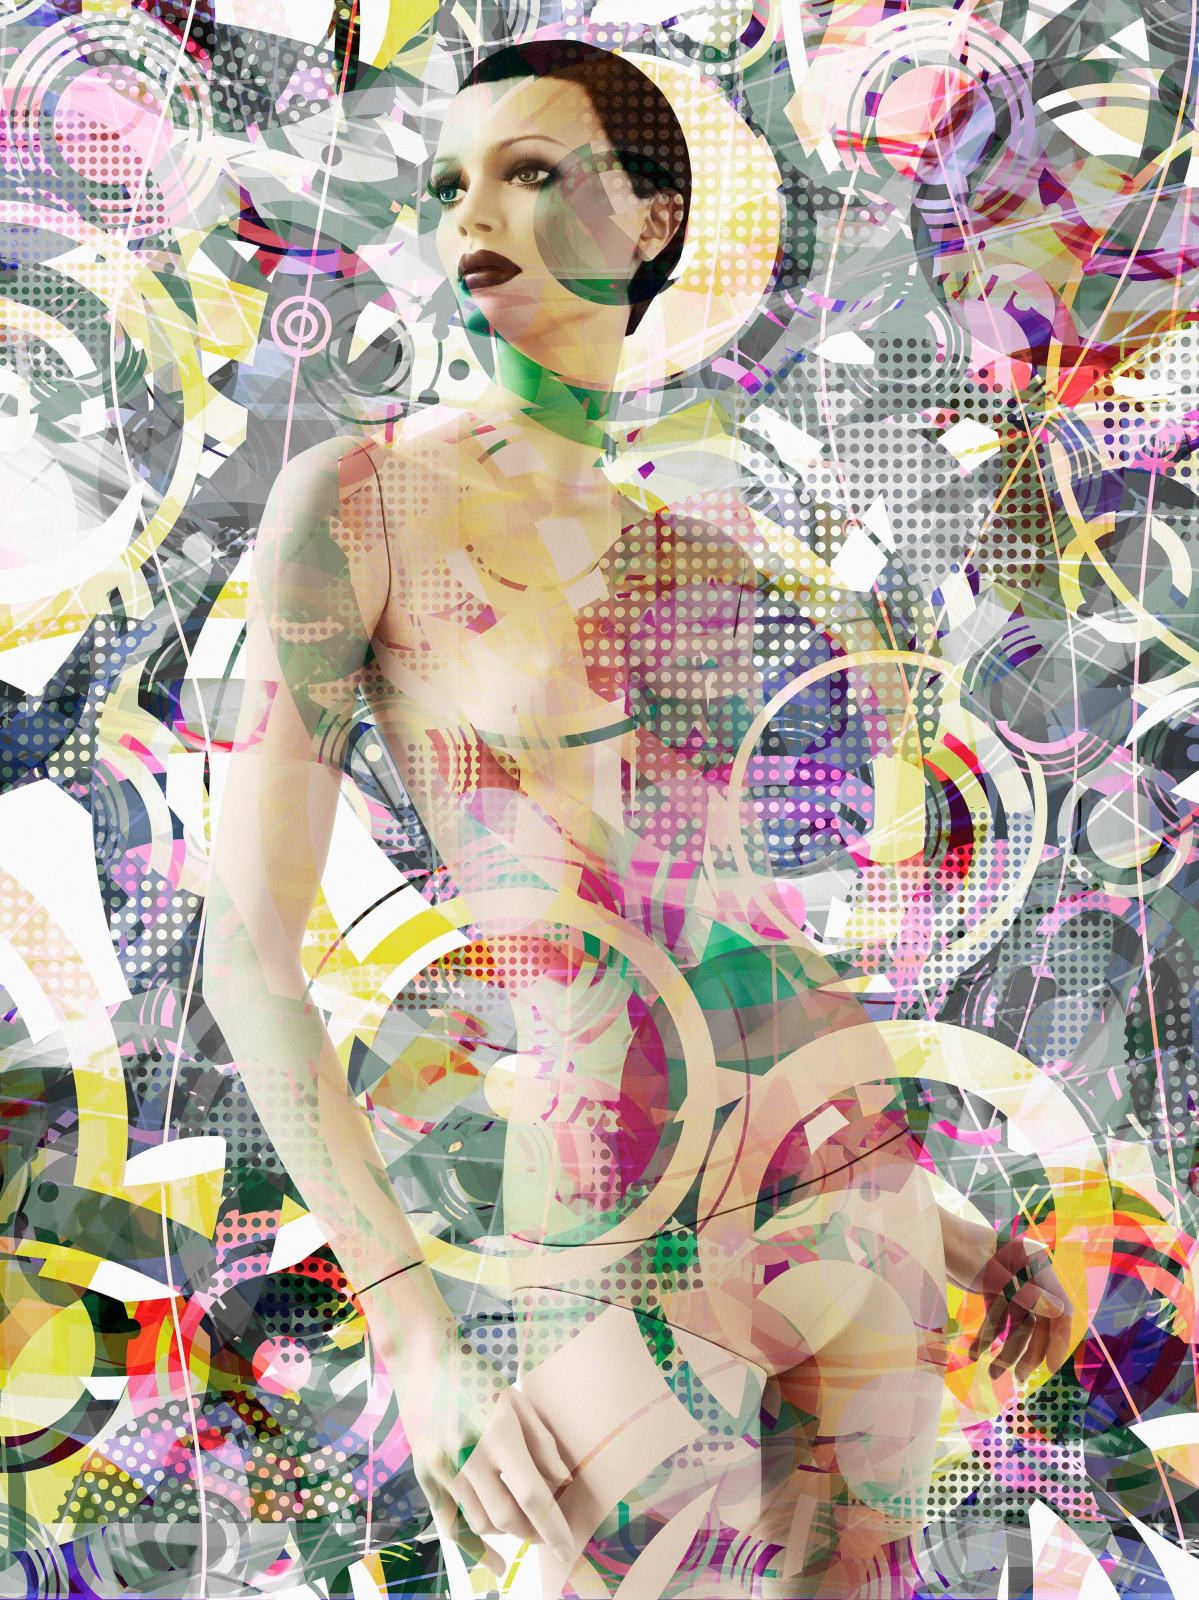 Valérie Belin Aura Super Models nude mannequin with multiple exposure image with colorful abstract shapes 